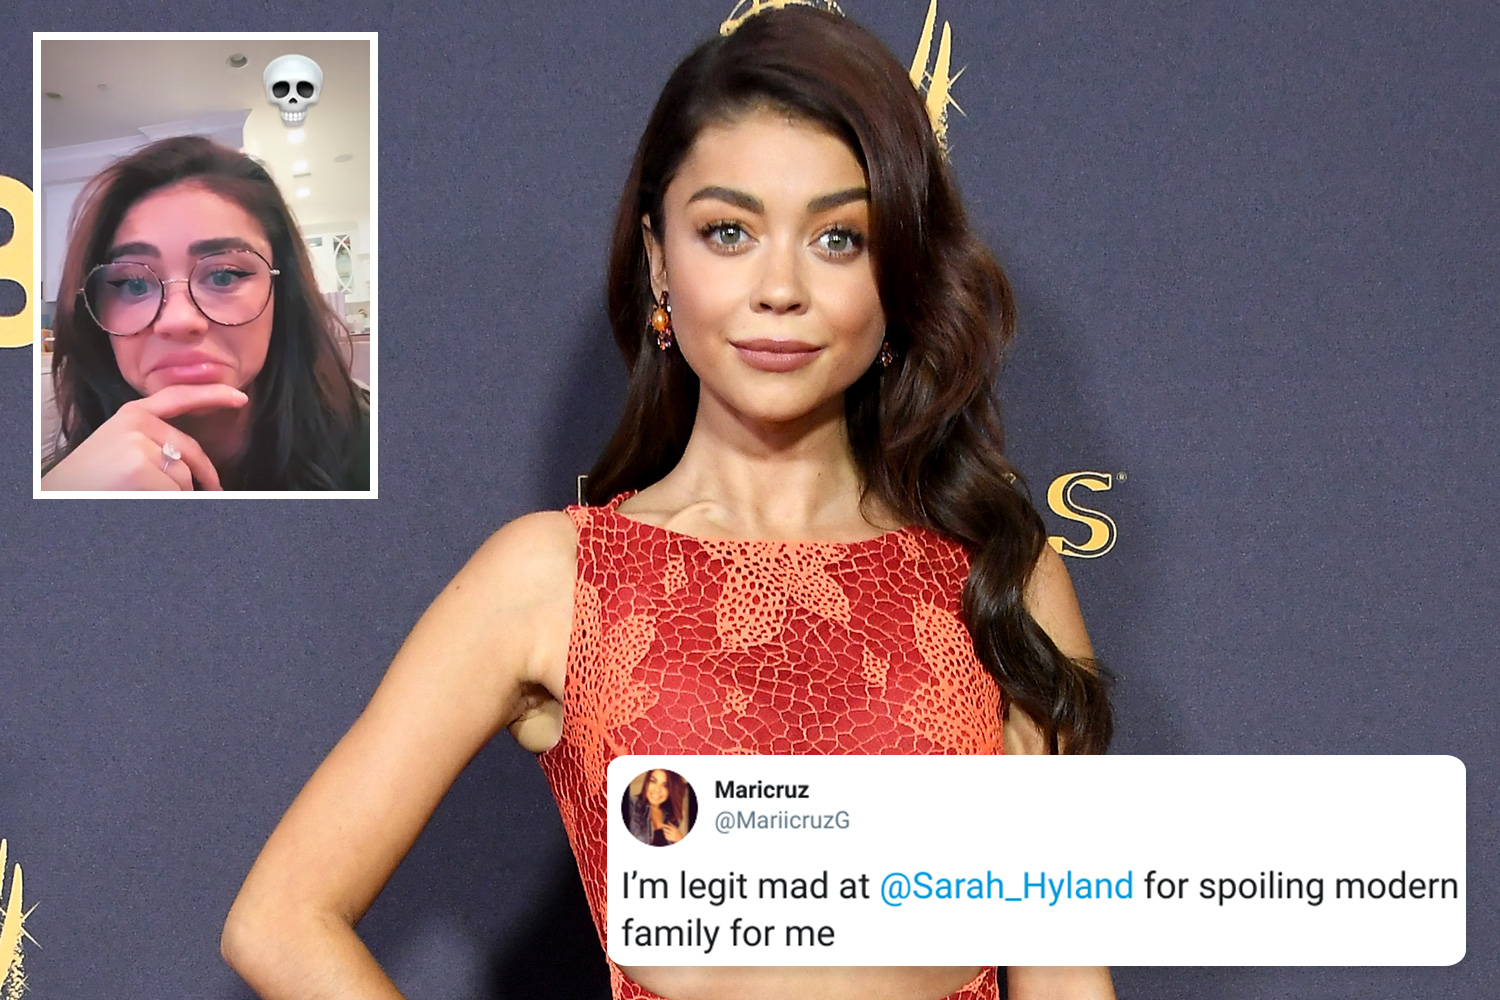 carina pedersen recommends sarah hyland leaked pic